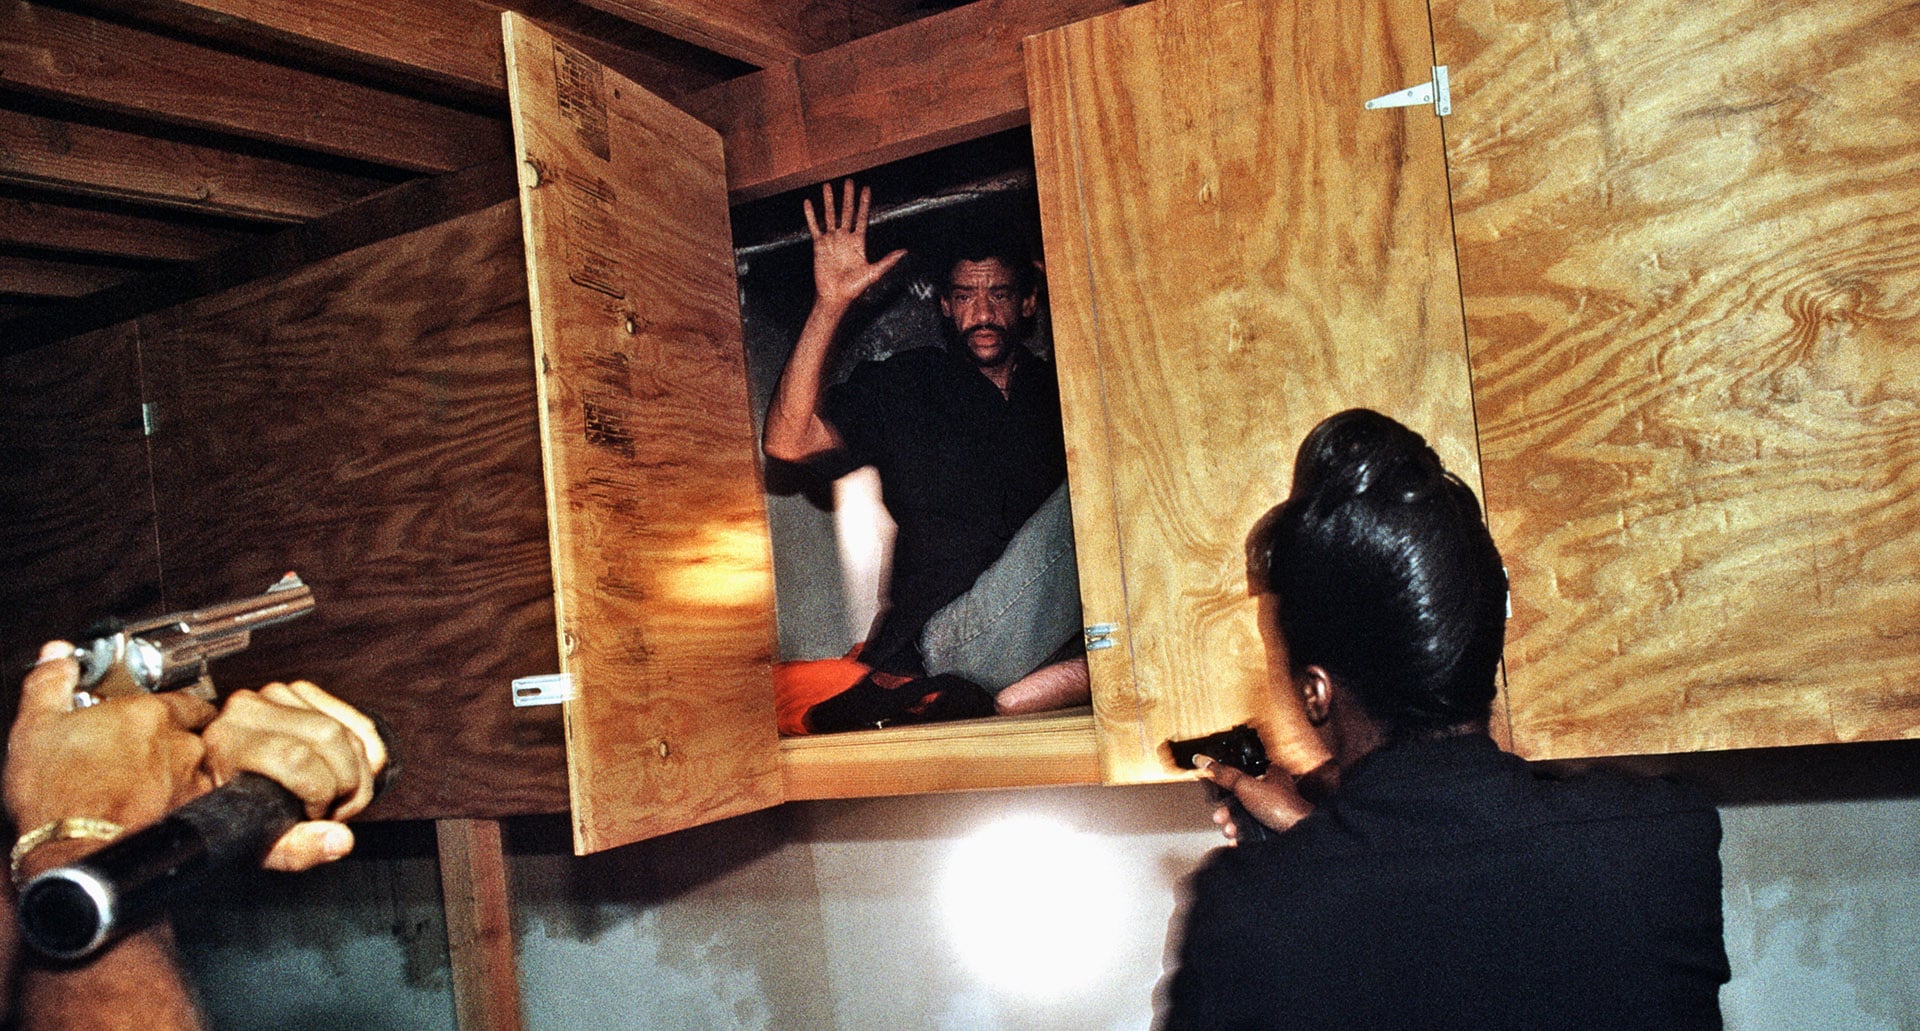 A Harrowing Look Inside the LAPD in the 1990s